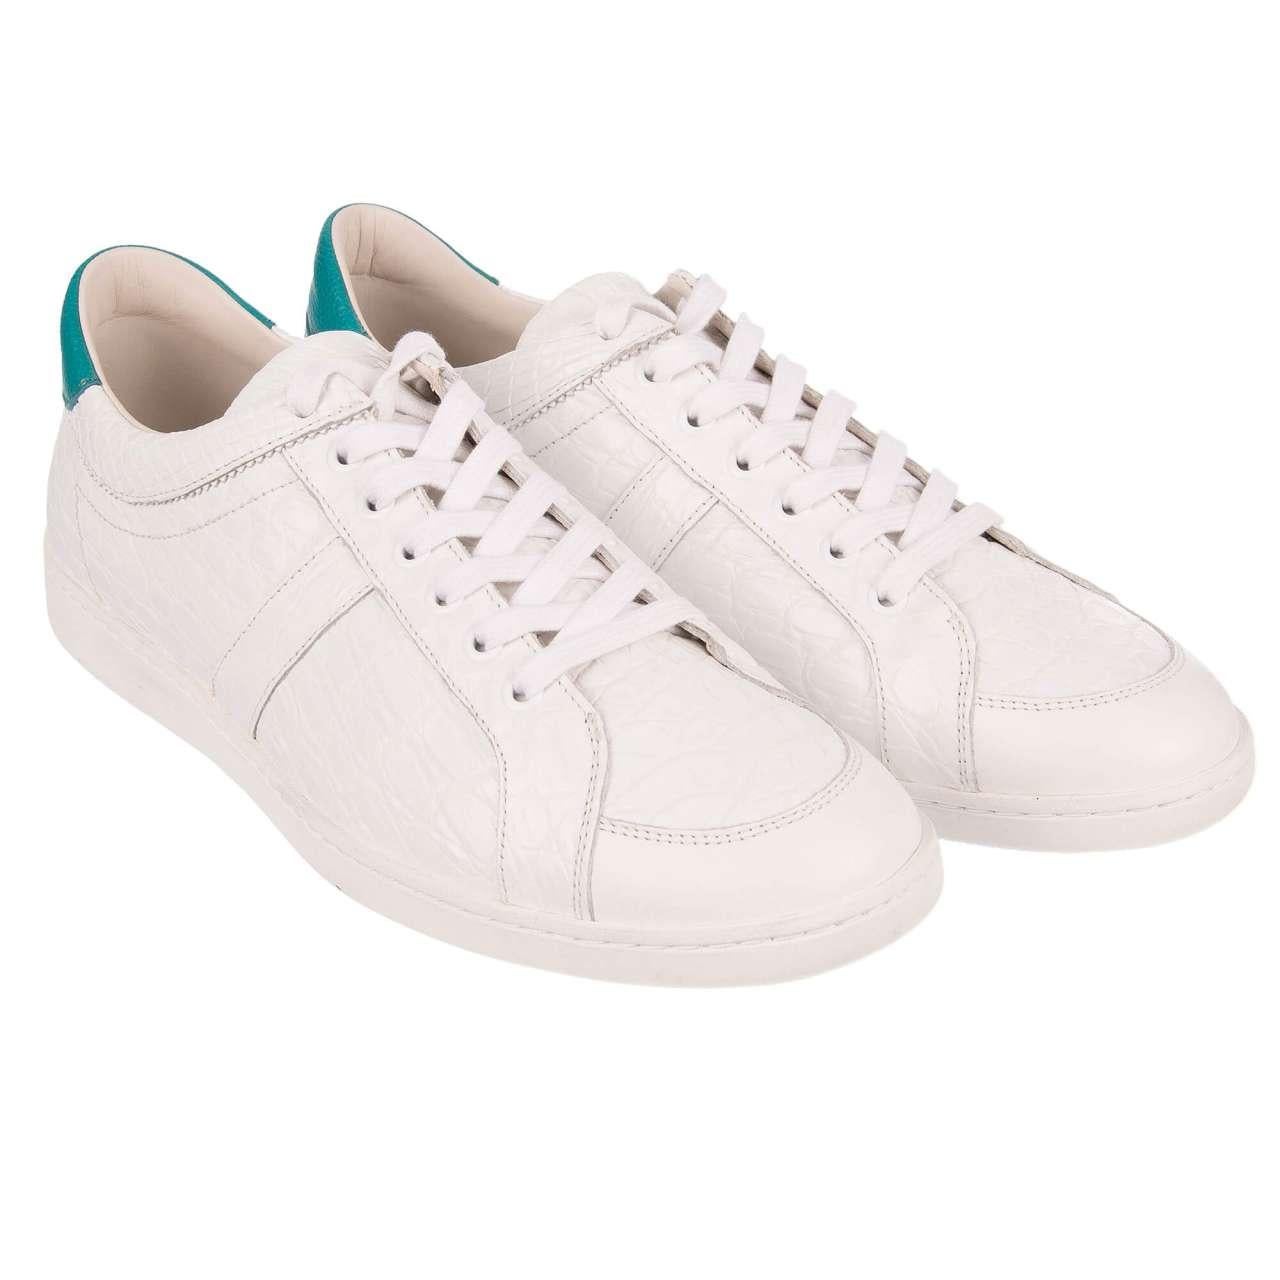 - Classic crocodile leather (caiman) sneakers GUATEMALA in white / azure with logo print by DOLCE & GABBANA - New with Box - Former RRP: EUR 1.950 - MADE IN ITALY - Model: CS1300-A2322-8B934 - Material: 87% Caiman, 13% Calfskin - Sole: Rubber -